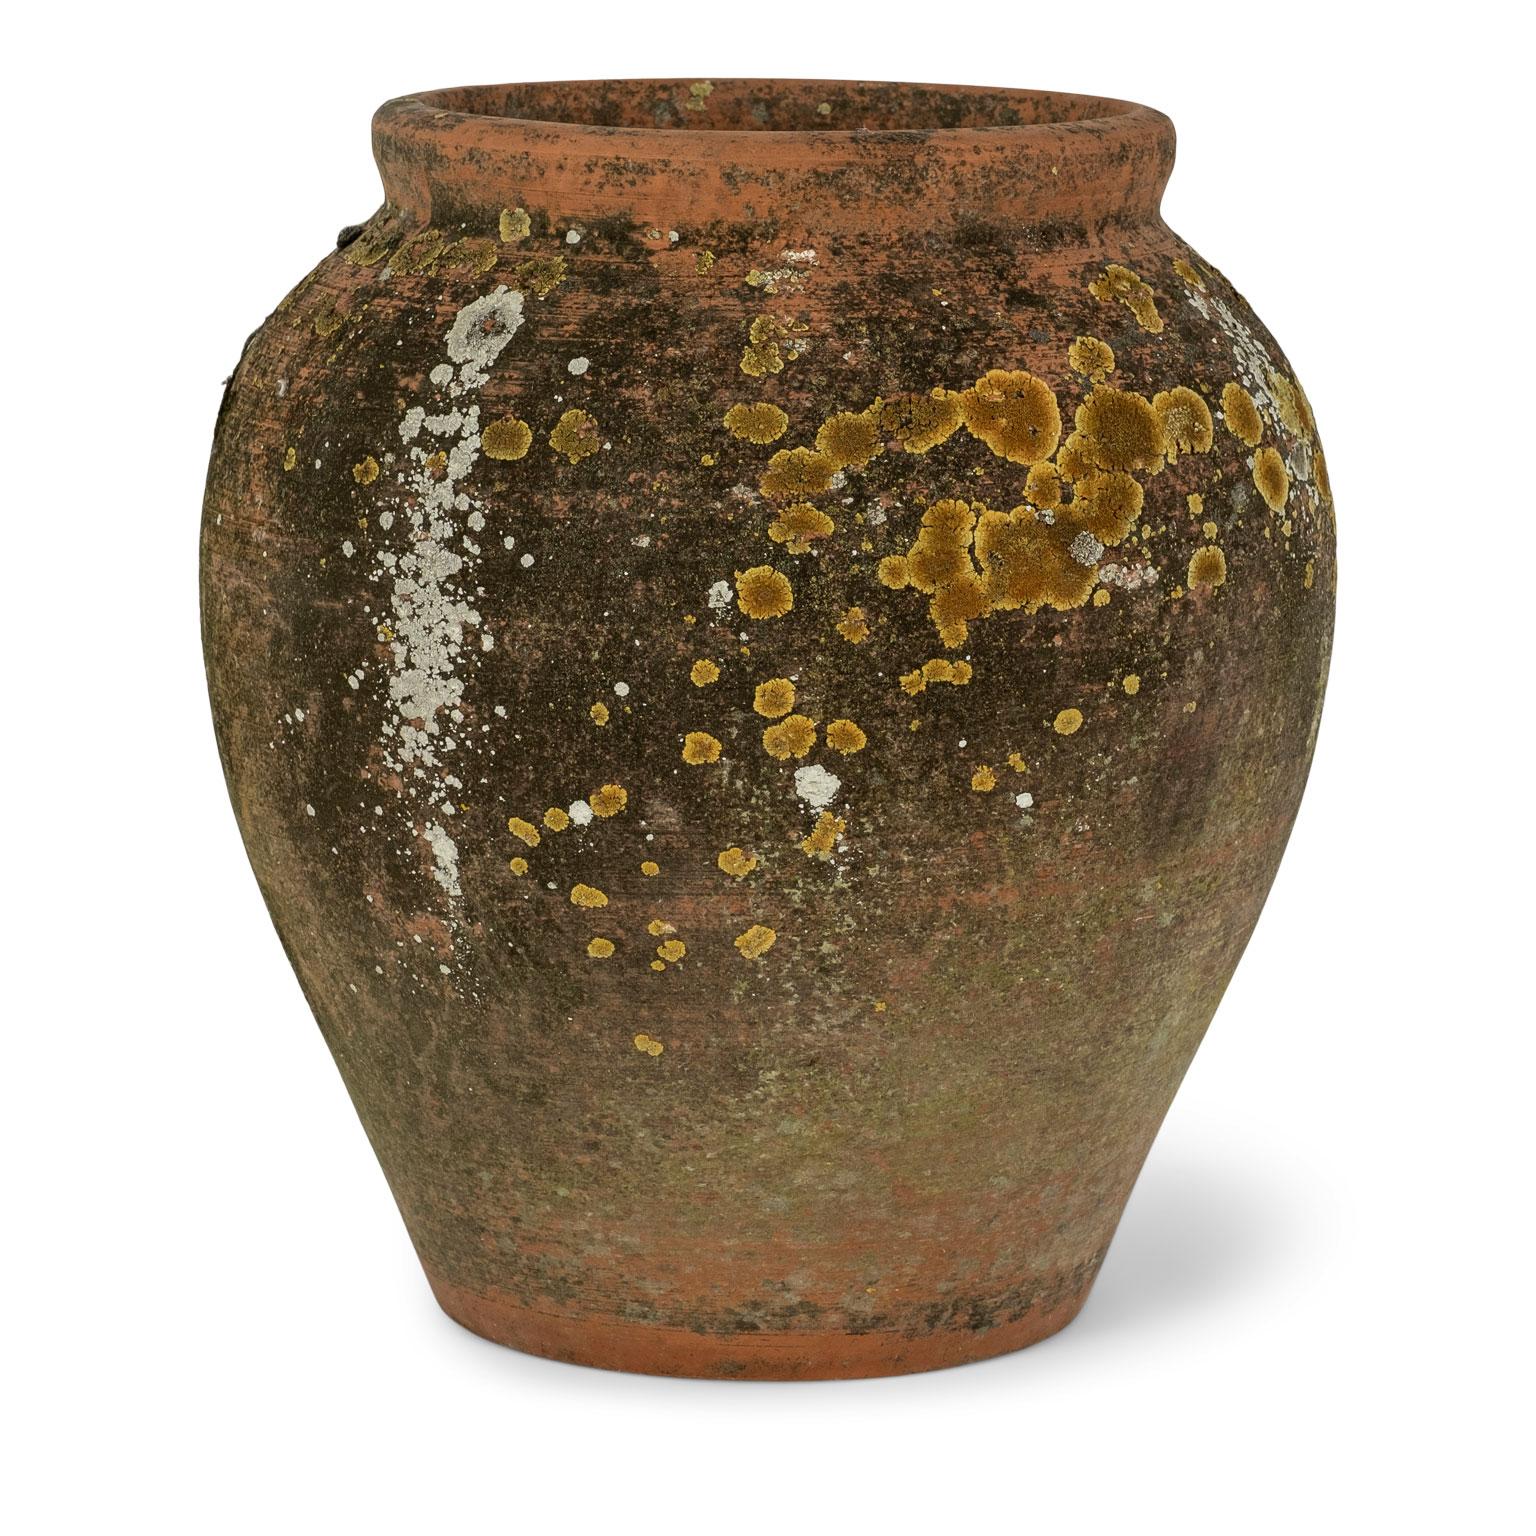 Antique urn-shape terracotta pot. Three available (see last image). Sold individually and priced $1,200 each.